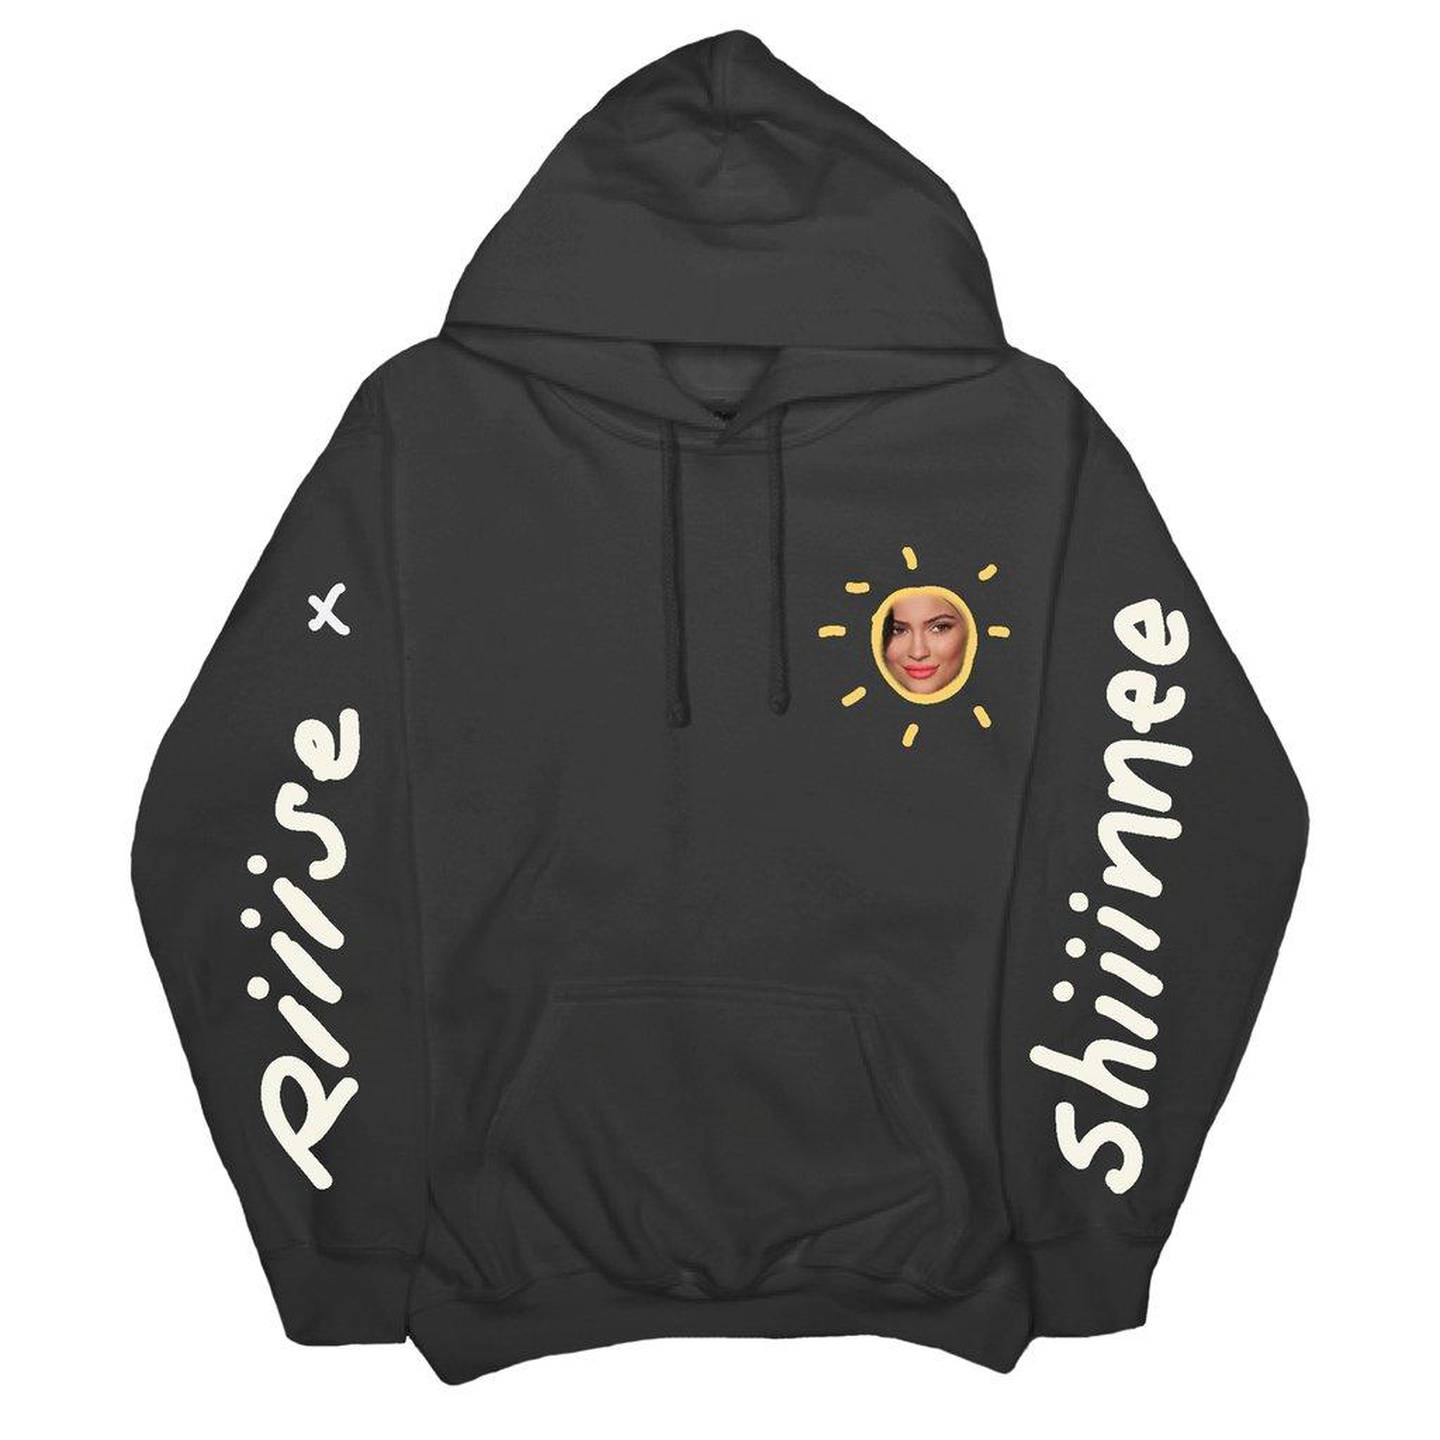 Kylie Jenner's Rise and Shine hoodie. Courtesy kyliejennershop.com